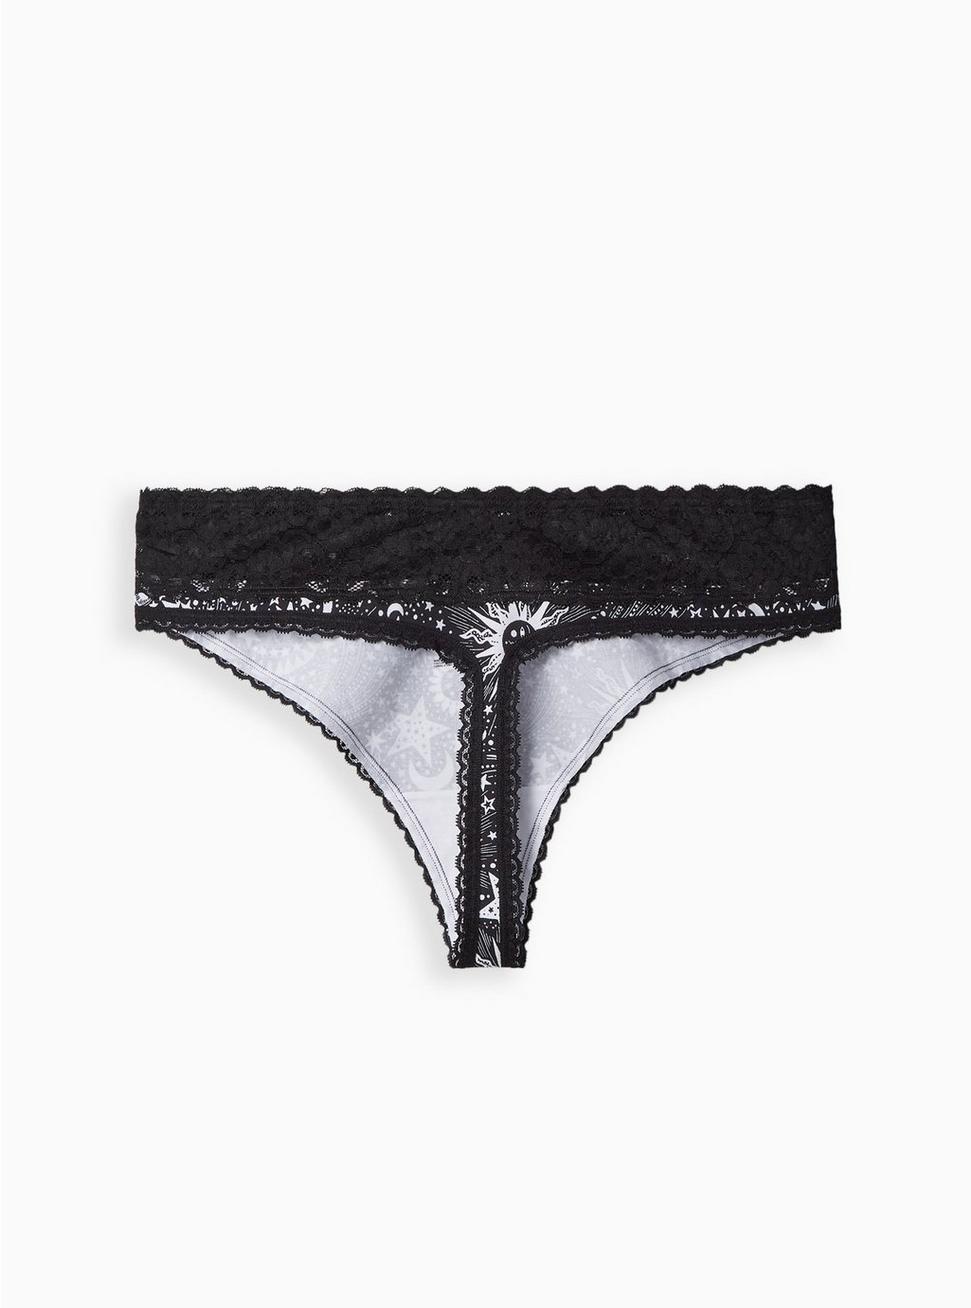 Cotton Mid-Rise Thong Lace Trim Panty, HEART OF GOLD BLACK, alternate